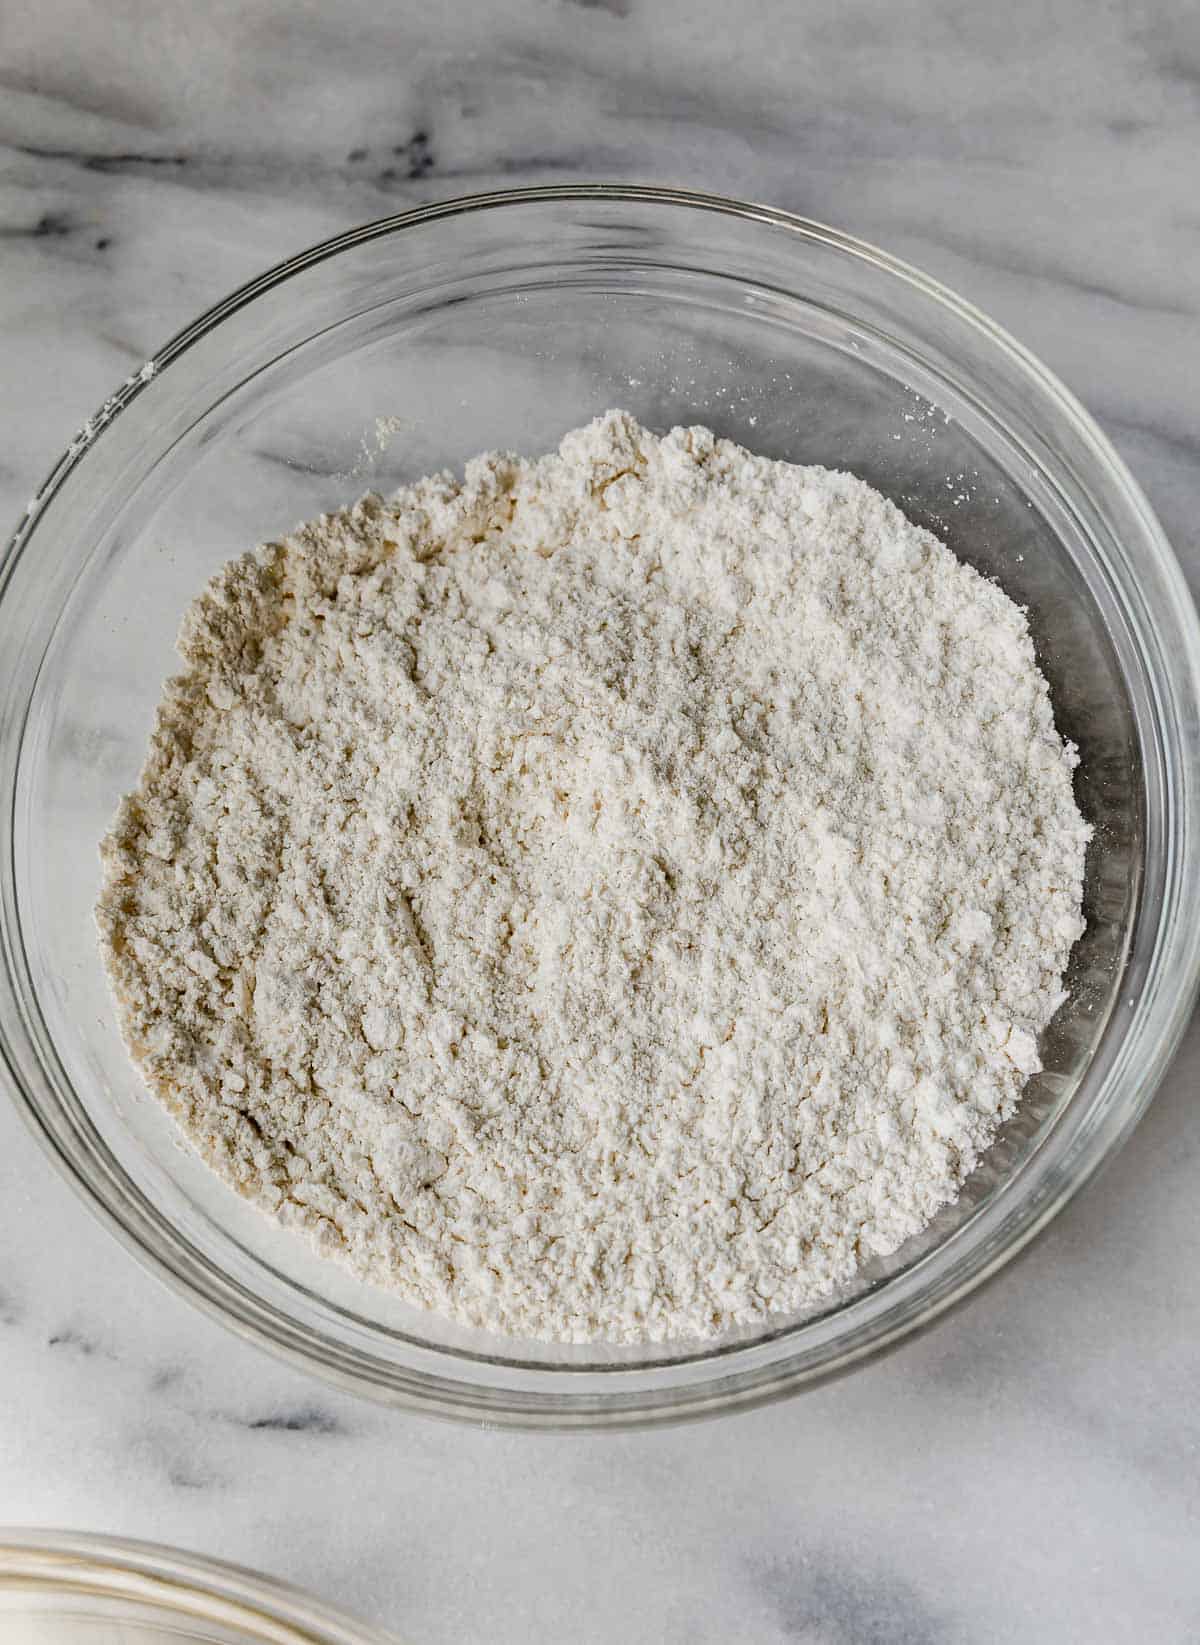 Dry ingredients in a glass bowl on a marble background.